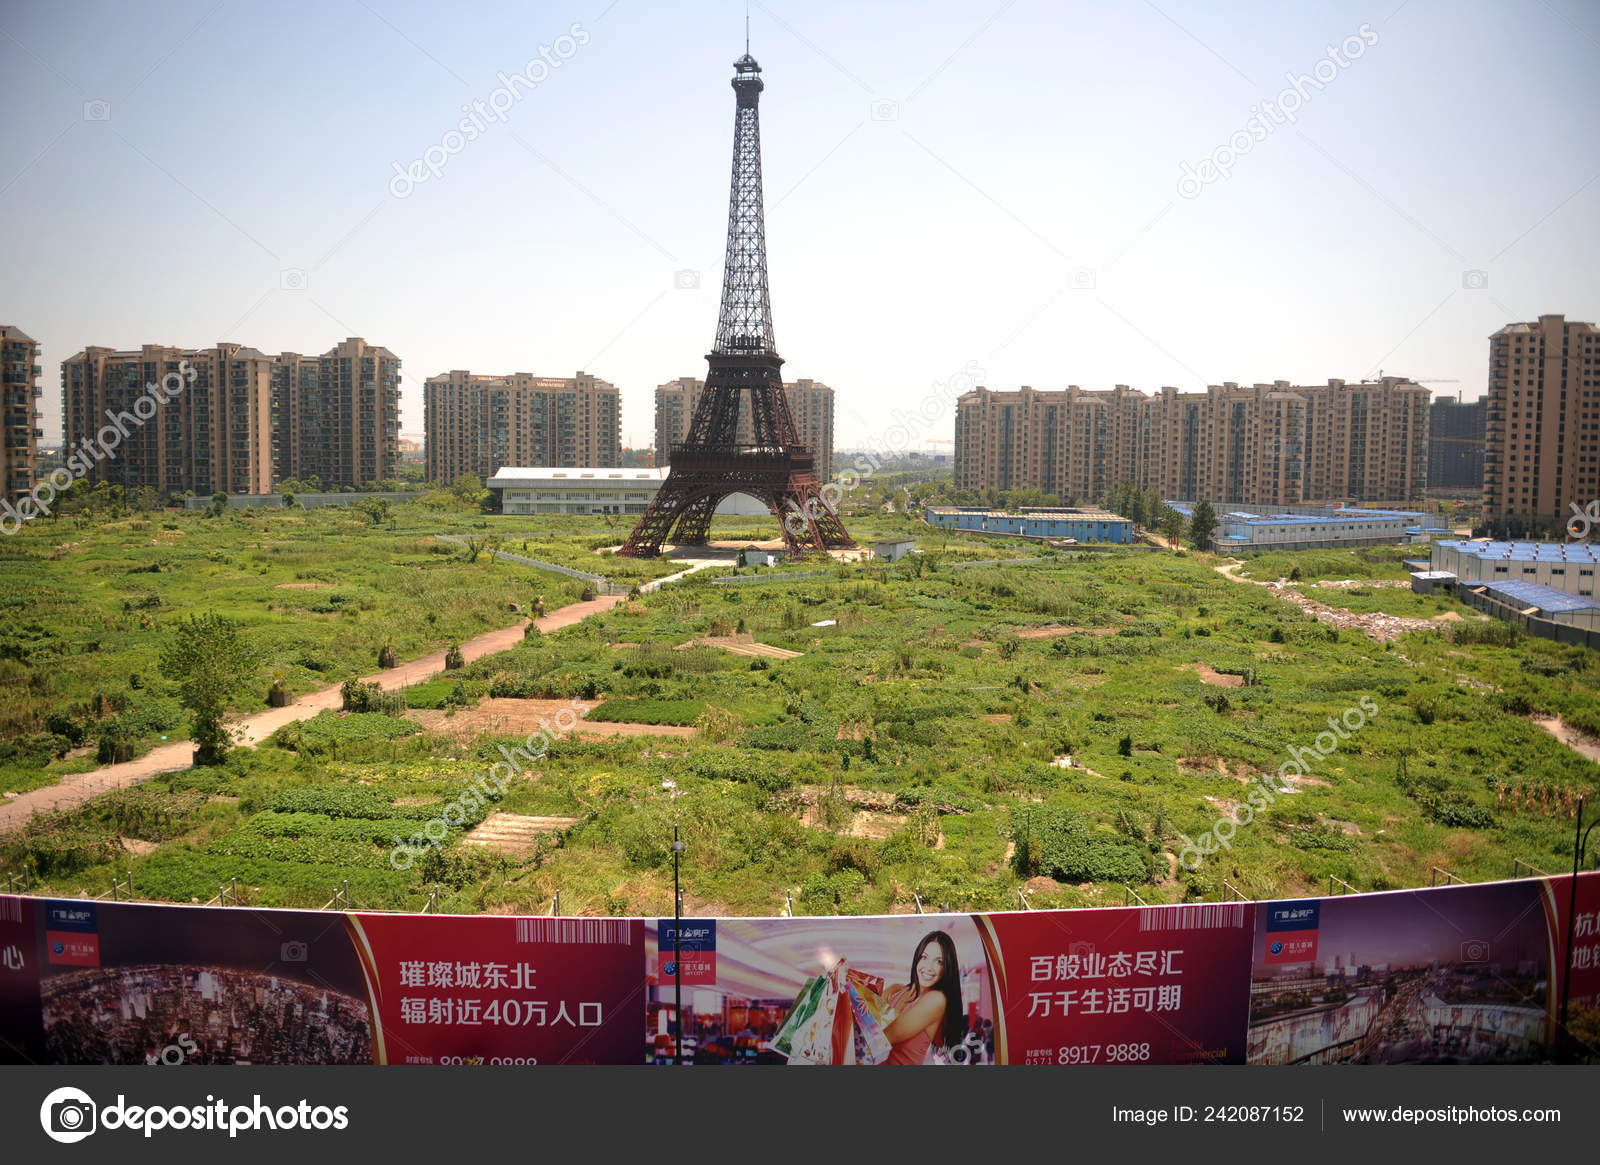 Half Sized Copy Eiffel Tower Pictured Tianducheng Small Chinese Community –  Stock Editorial Photo © ChinaImages #242087152